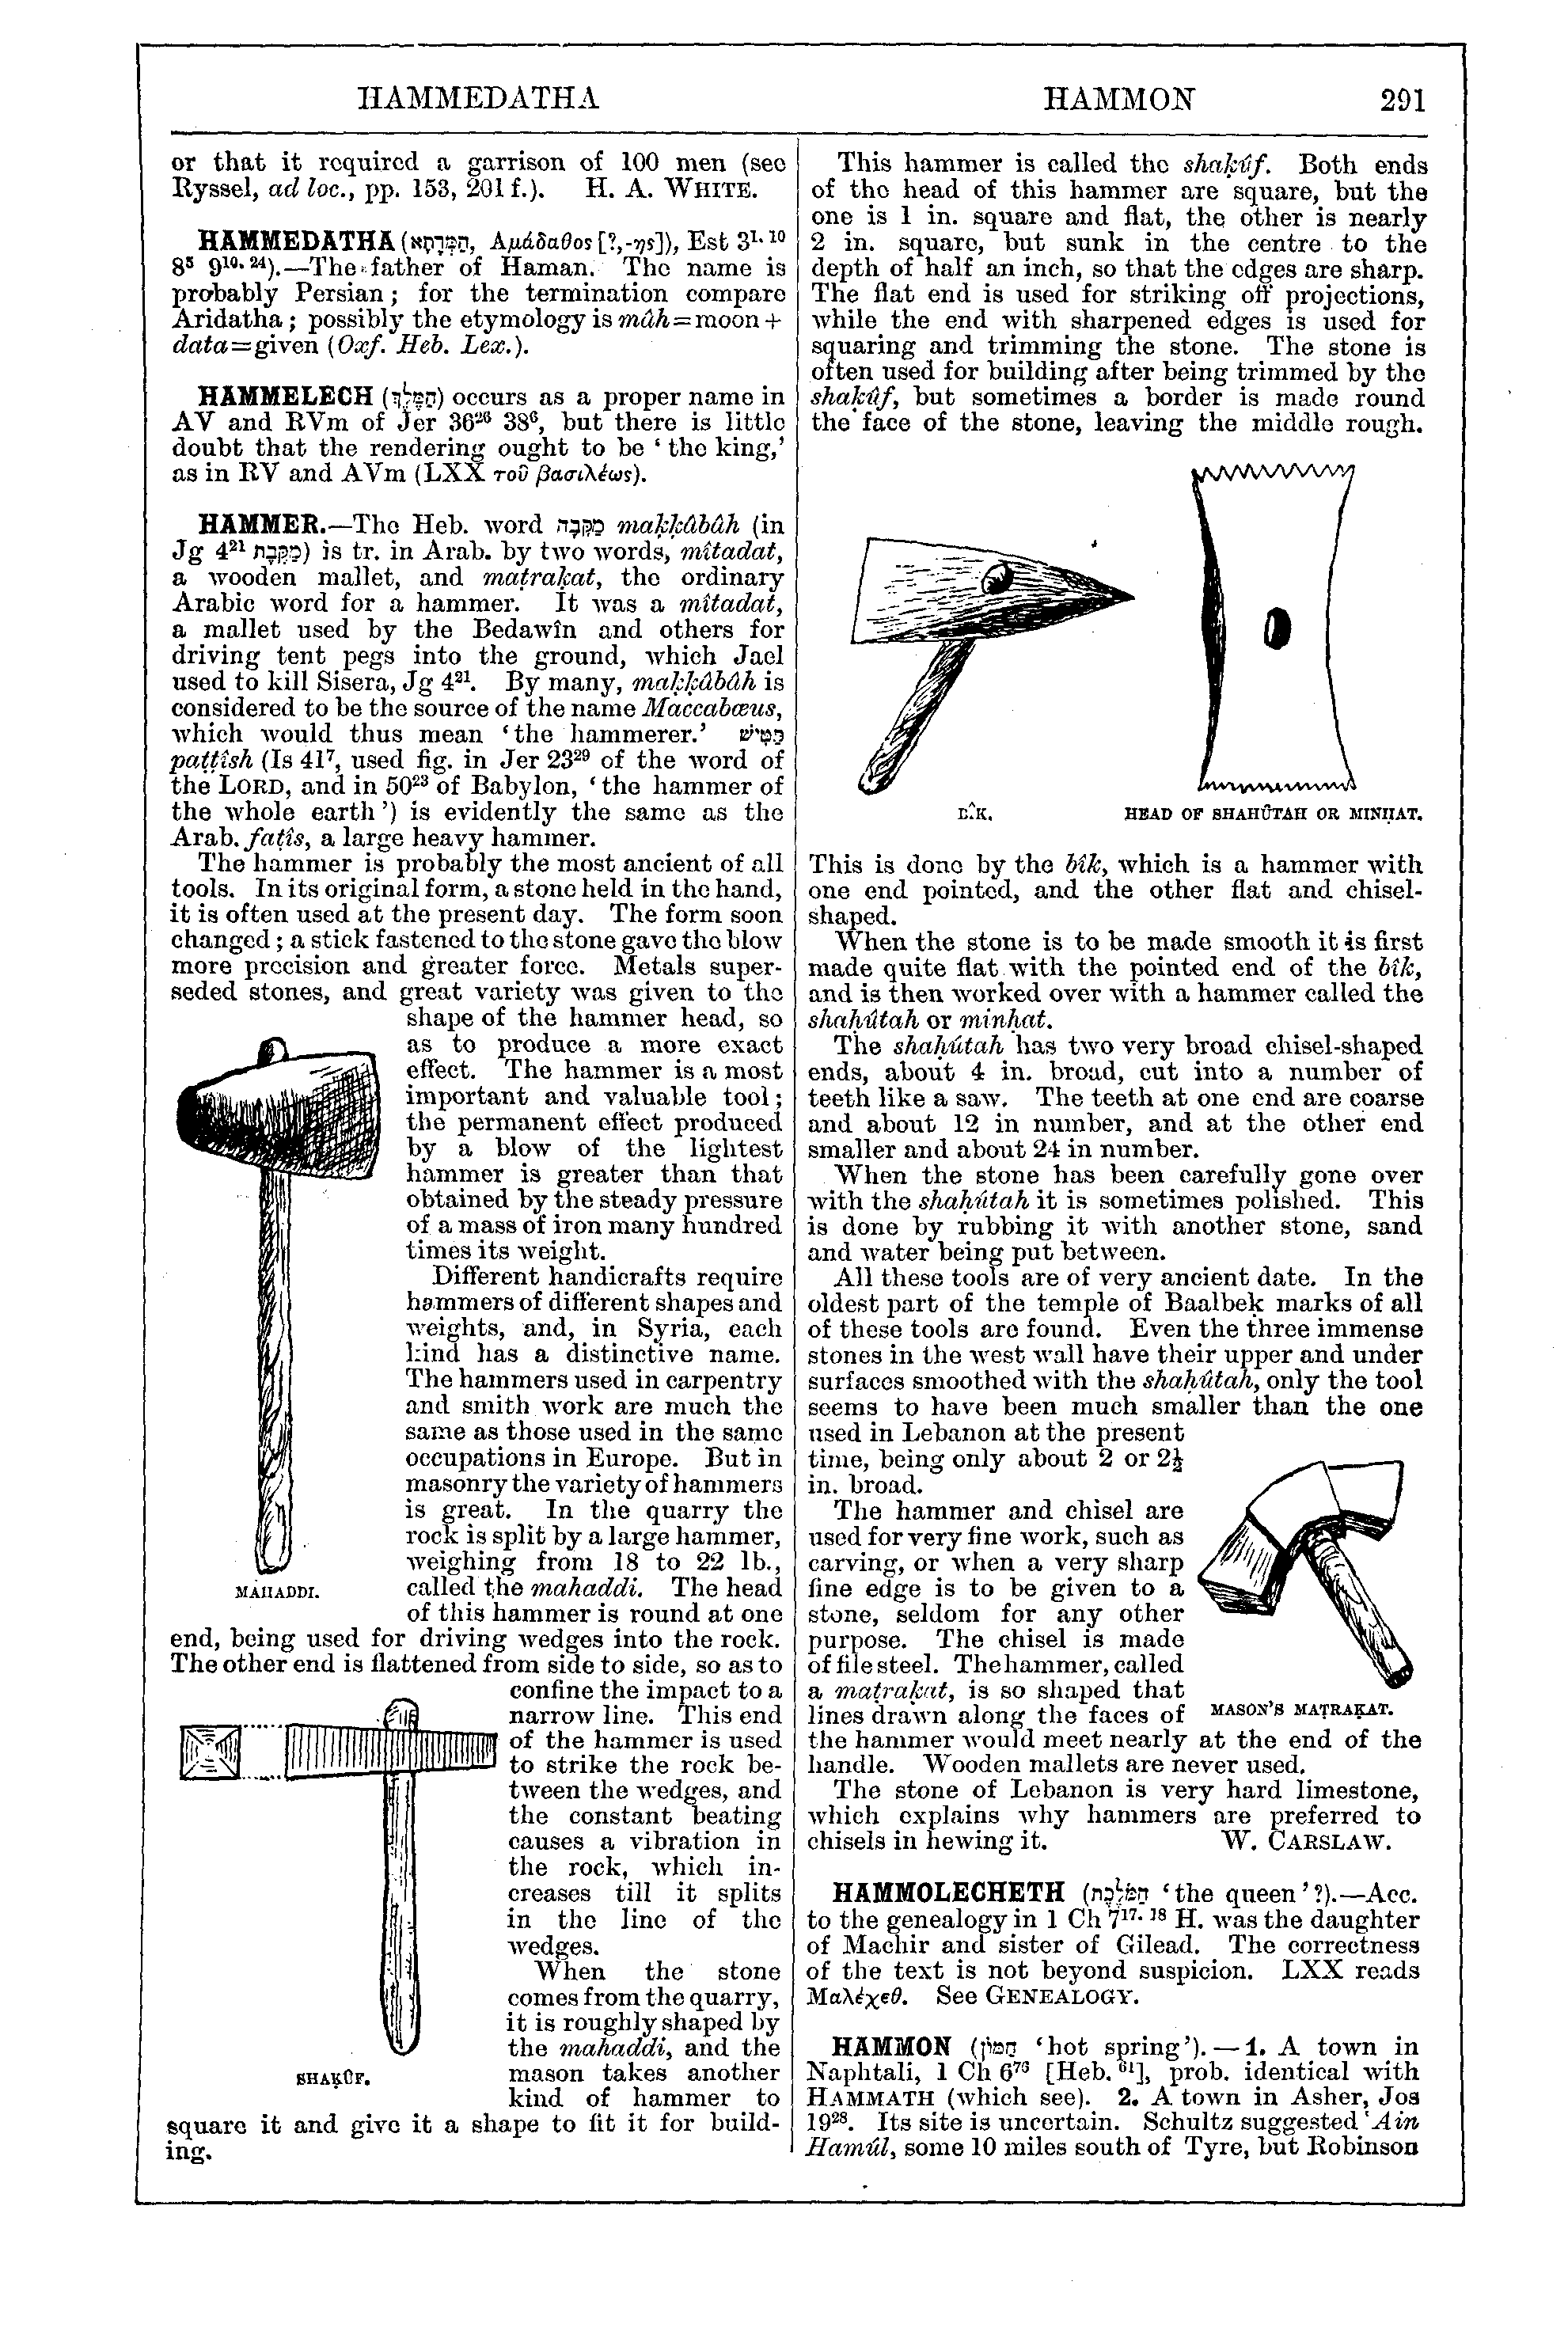 Image of page 291